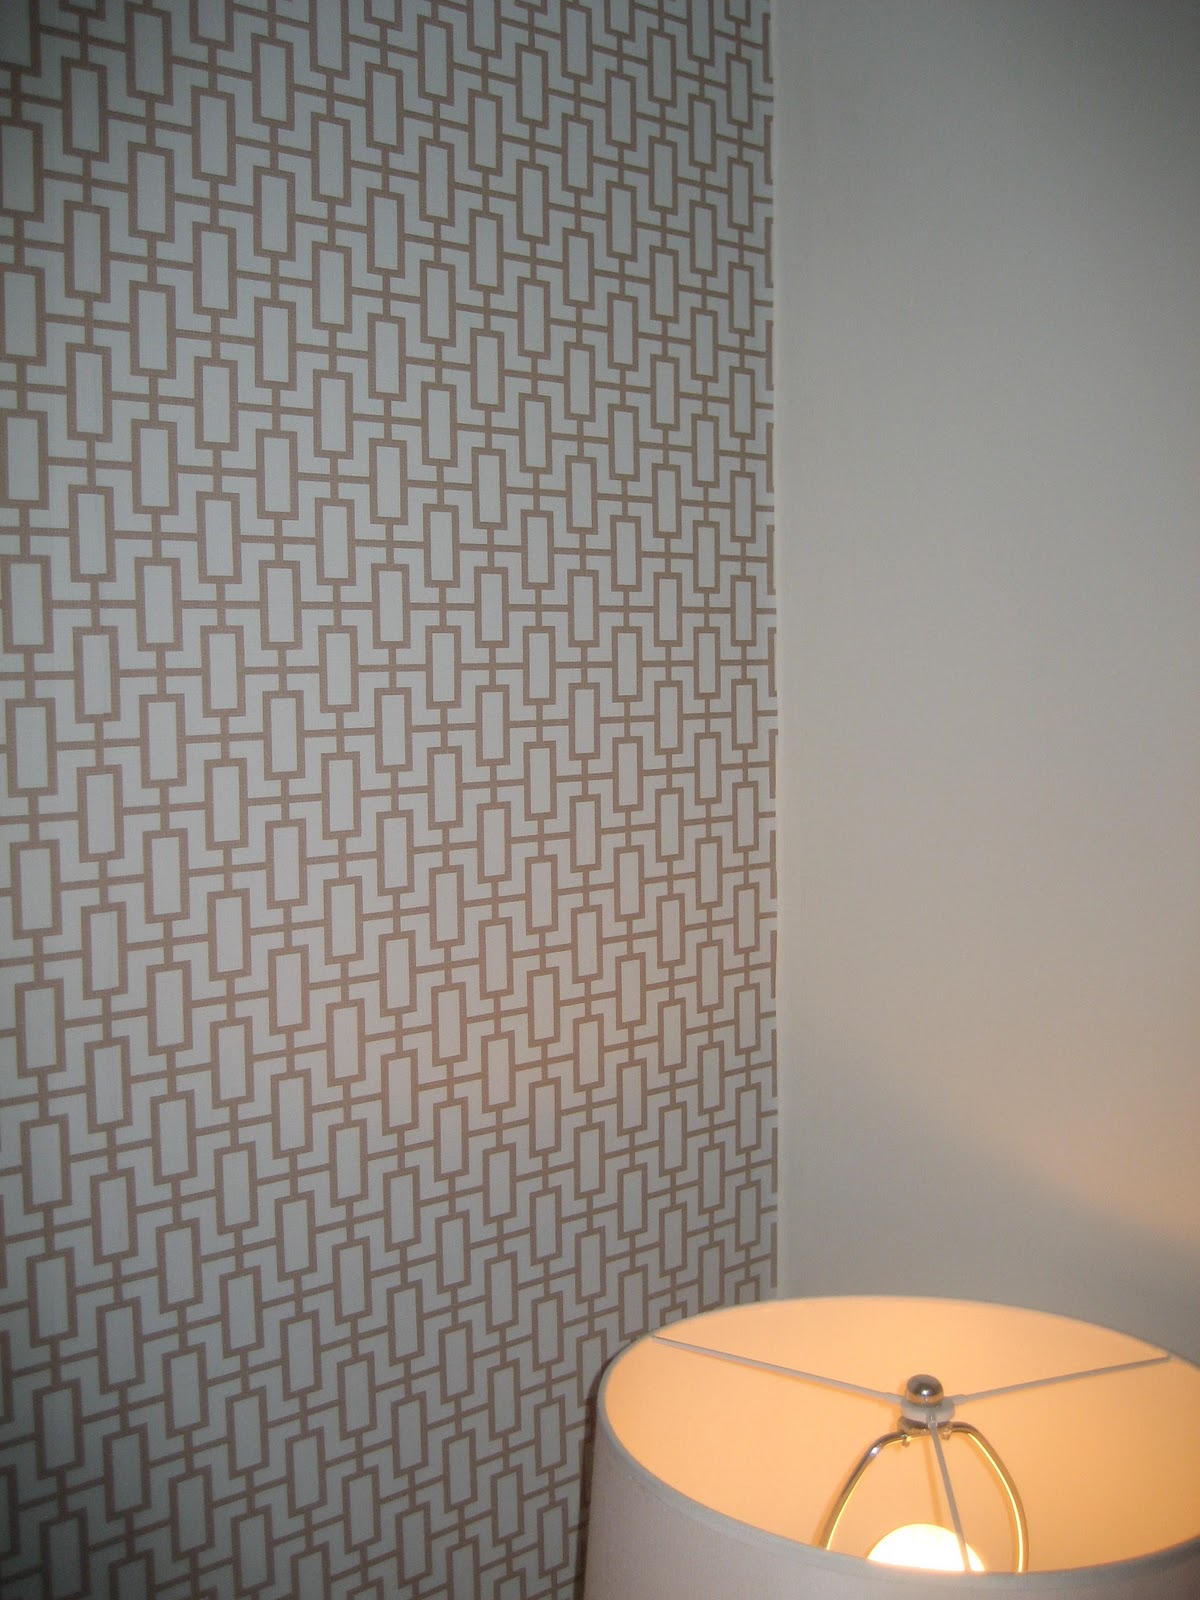 I have a geometric print wallpaper, so I didn't want another pattern that 